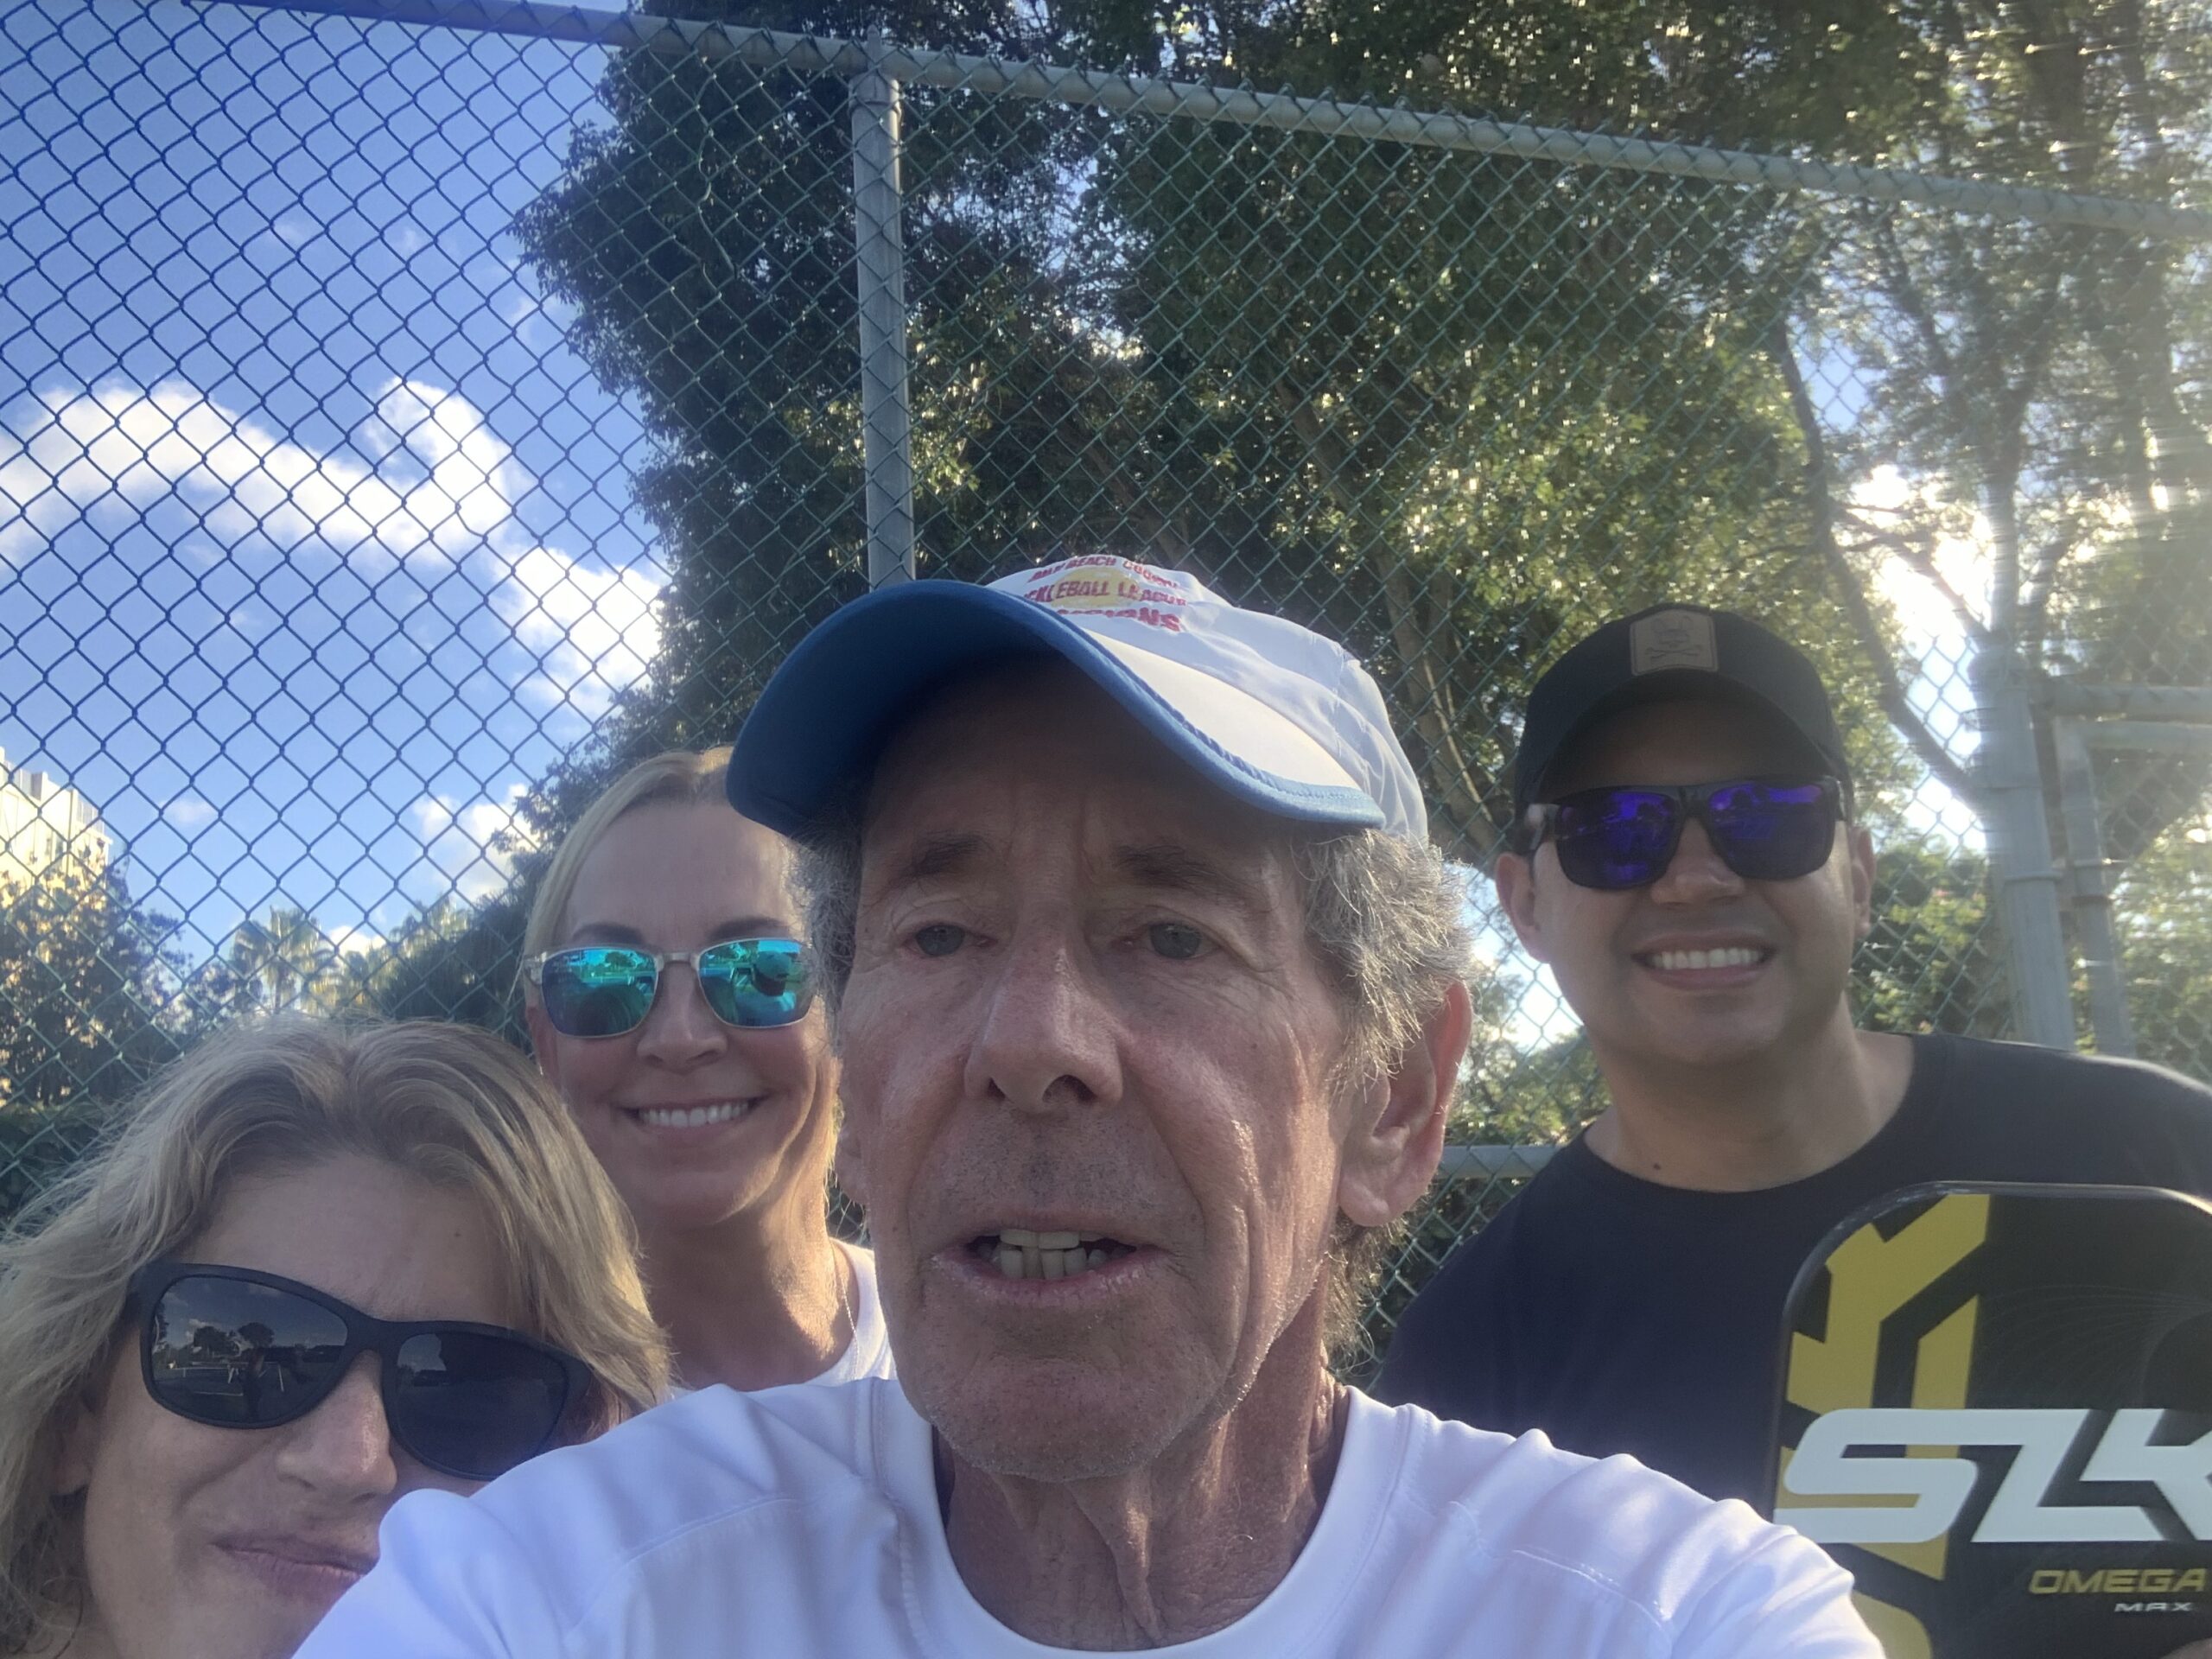 Bob with Cherie, Amy, and Frank after an Advanced Beginners Pickleball Clinic in Delray Beach, FL